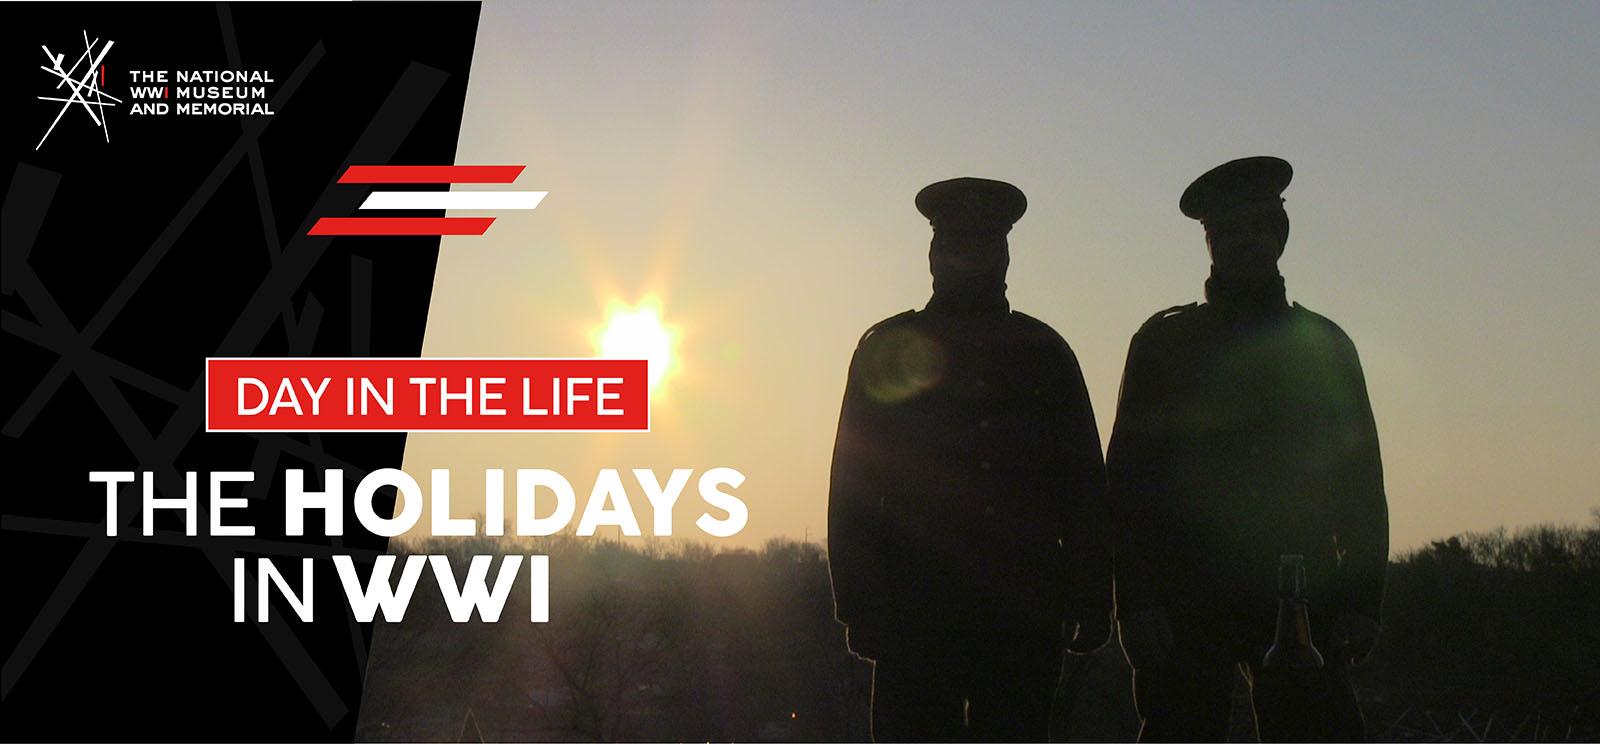 Image: Two people in WWI uniform stand silhouetted against a sunrise. Text: Day in the Life / The Holidays in WWI